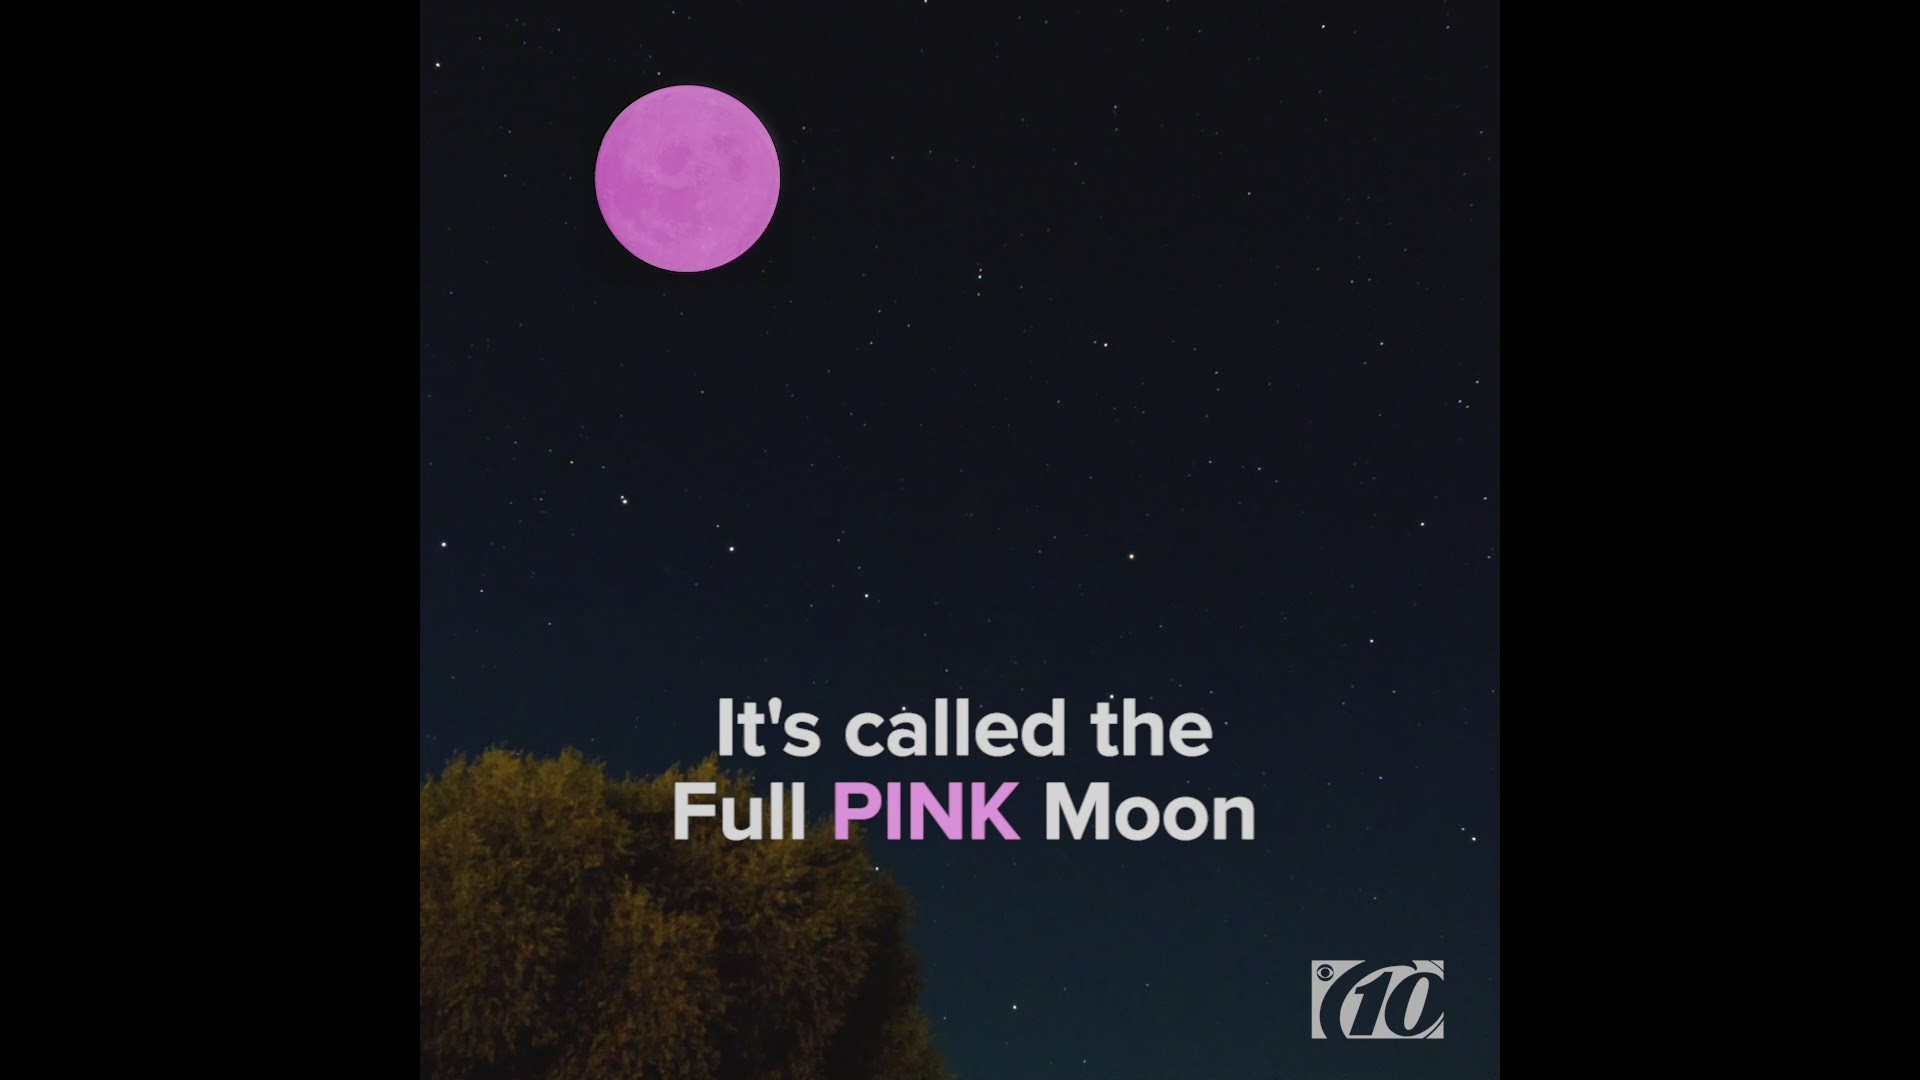 It won’t be pink in color, but it is the full pink moon tonight and it will be the biggest and brightest moon of the year.